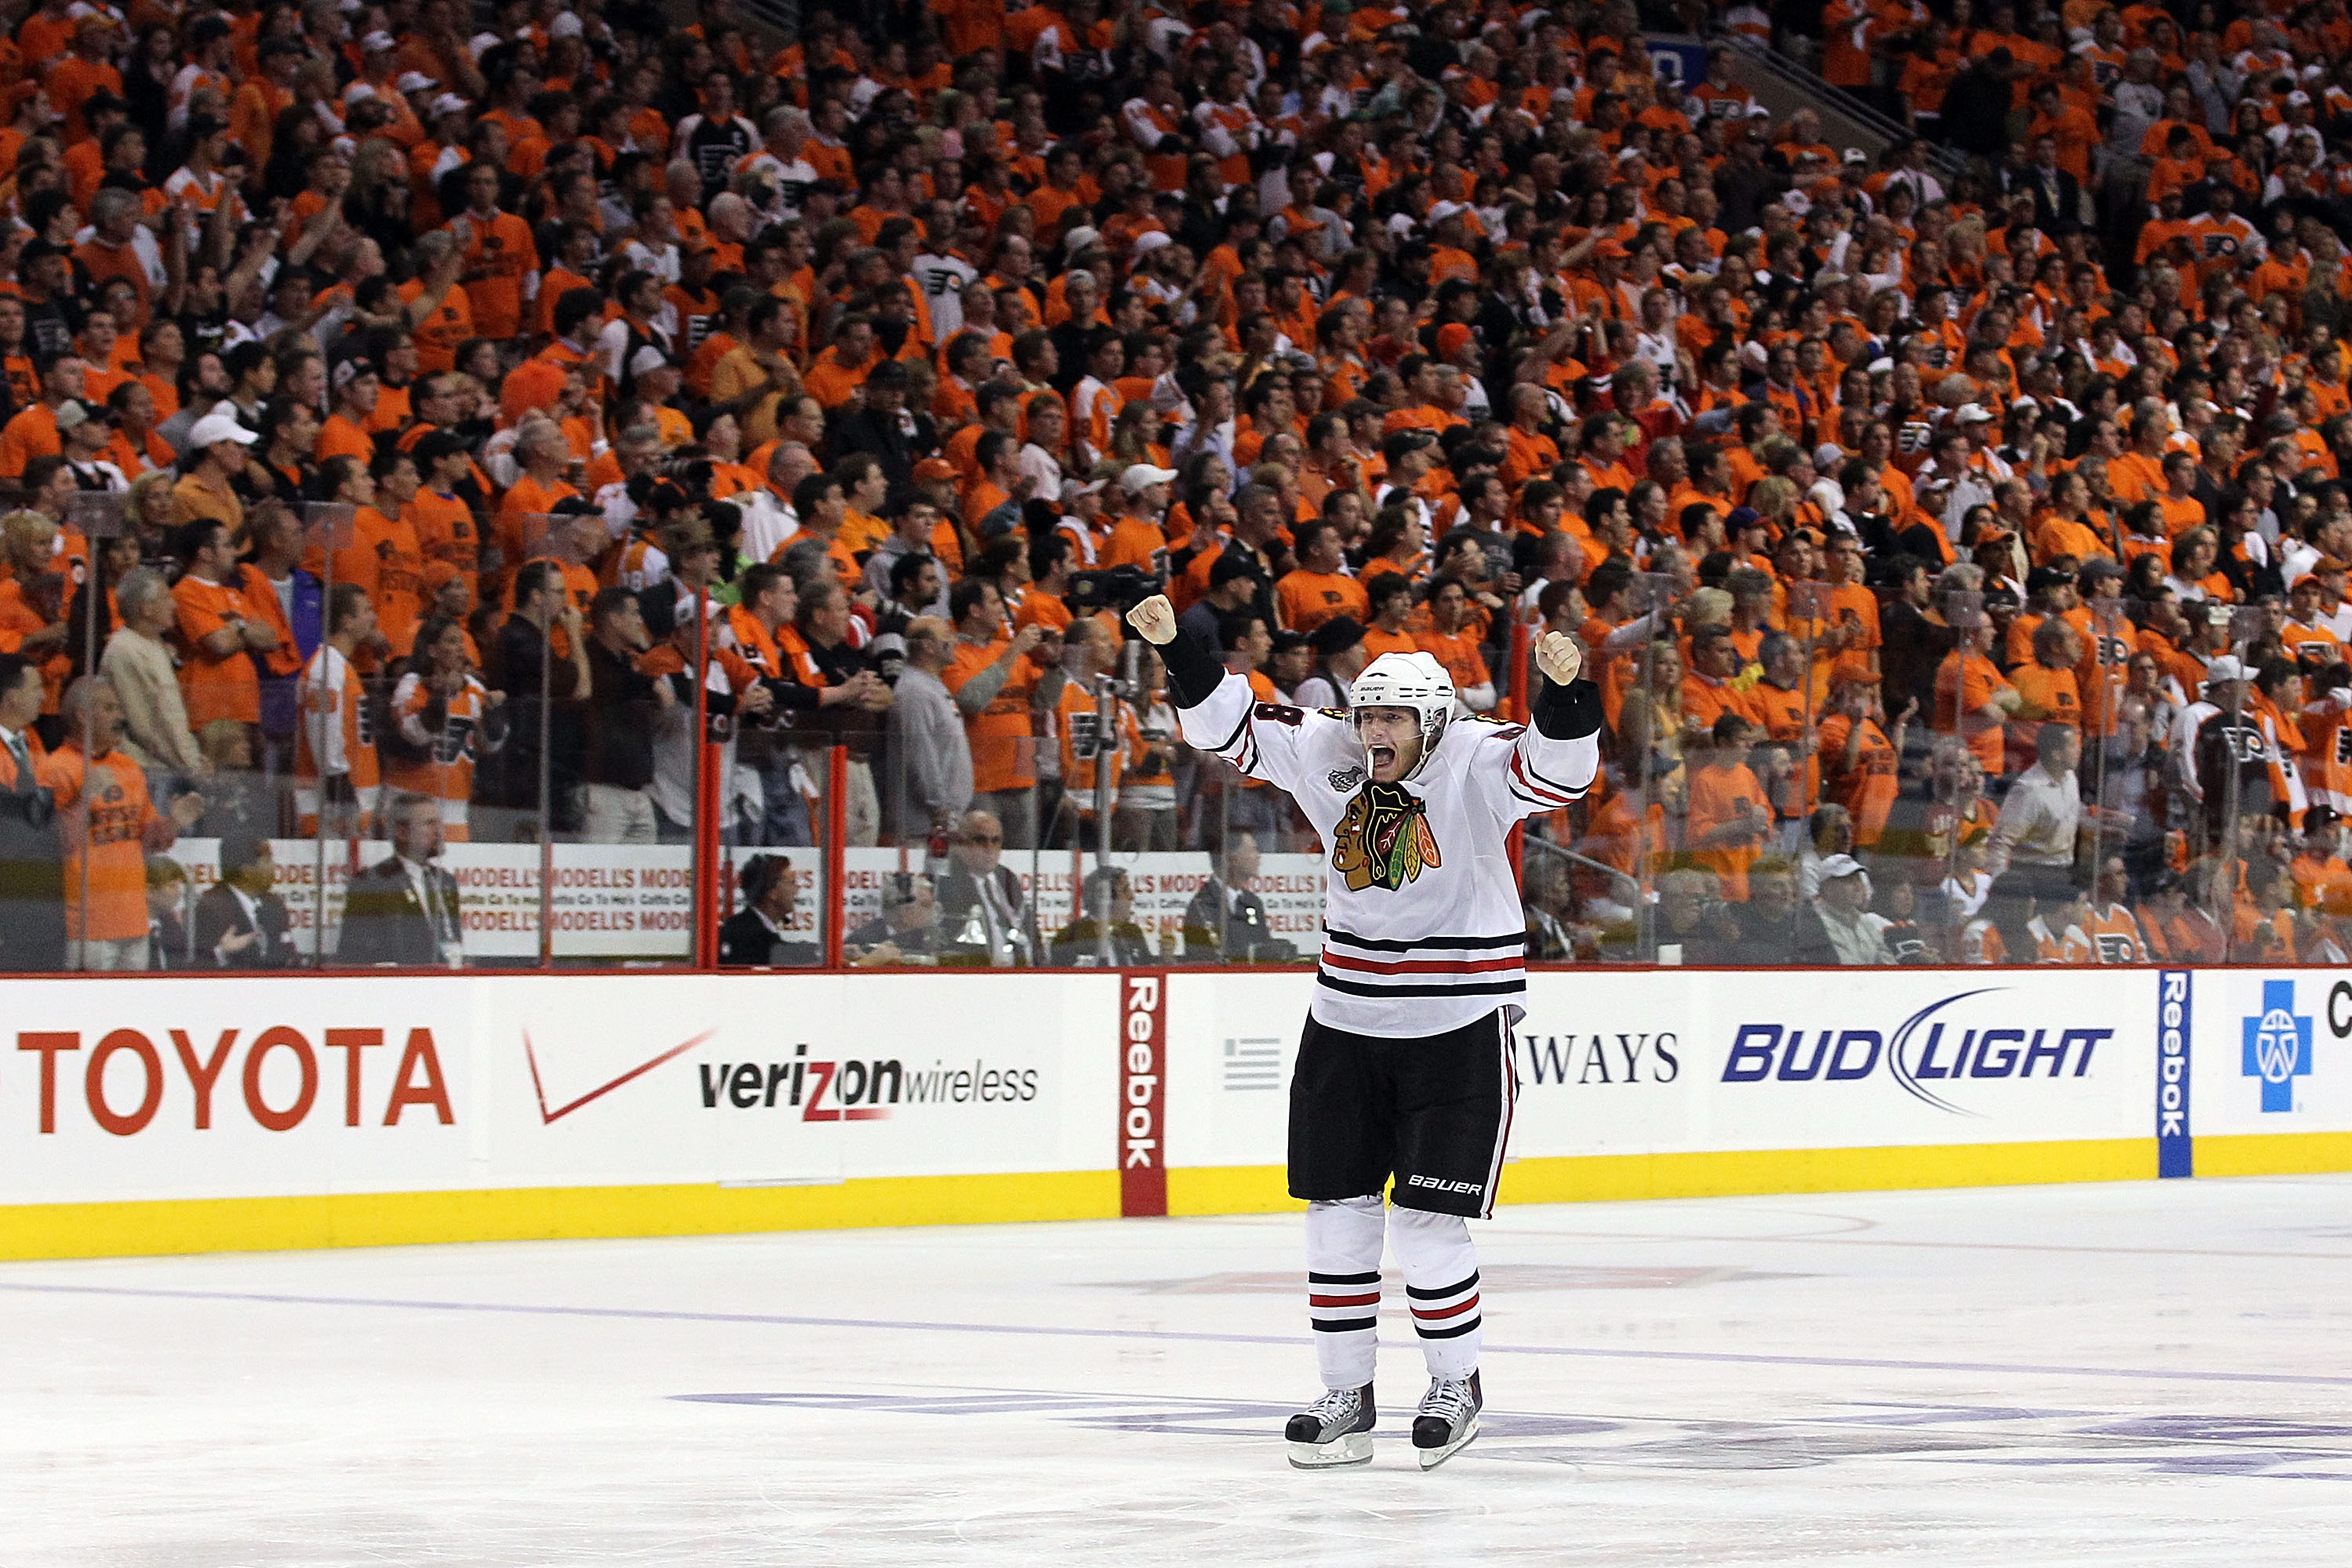 PHILADELPHIA - JUNE 09:  Patrick Kane #88 of the Chicago Blackhawks celebrates after scoring the game-winning goal in overtime to defeat the Philadelphia Flyers 4-3 and win the Stanley Cup in Game Six of the 2010 NHL Stanley Cup Final at the Wachovia Cent